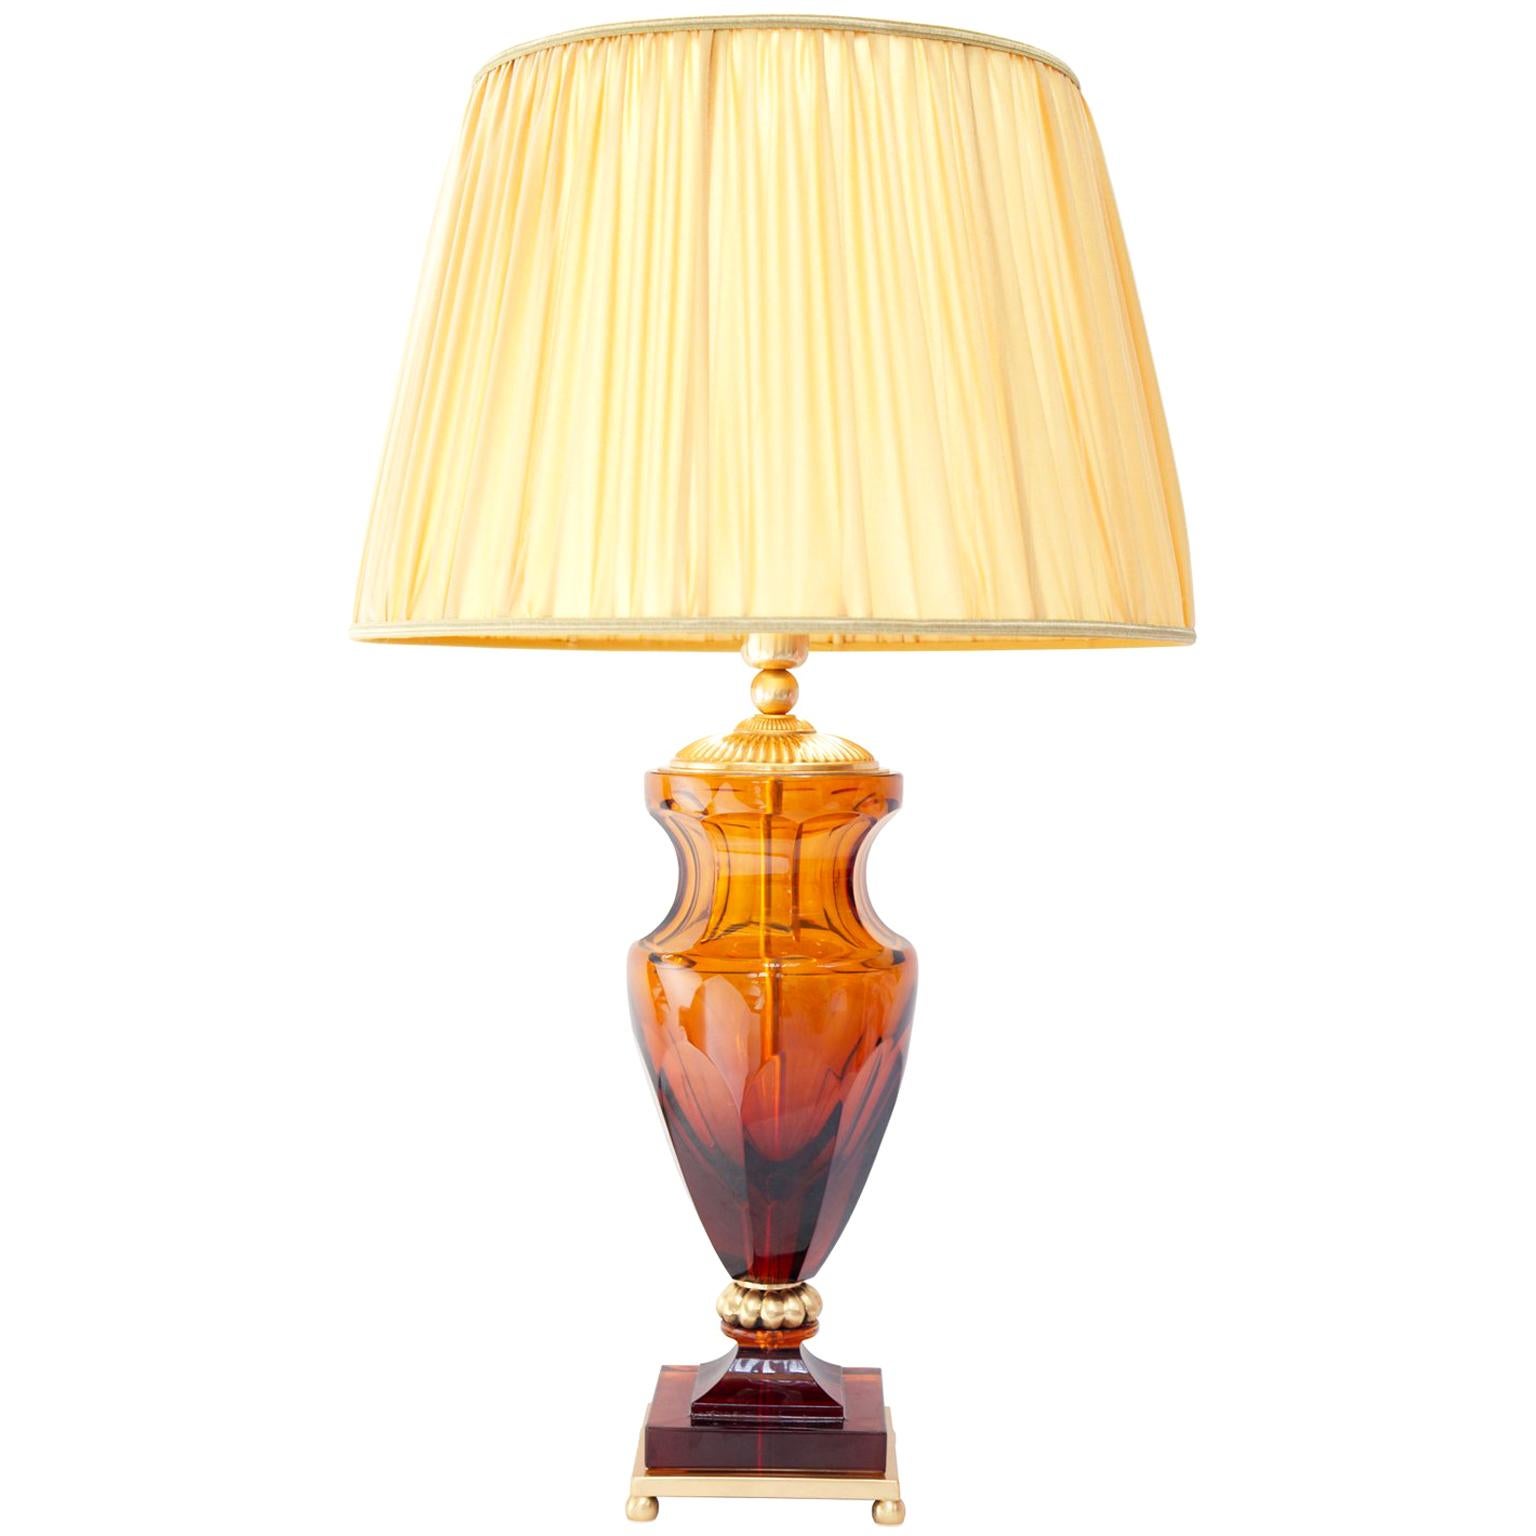 Ugo Poggi Firenze Handcrafted Crystal Table Lamp Vallombrosa For Sale